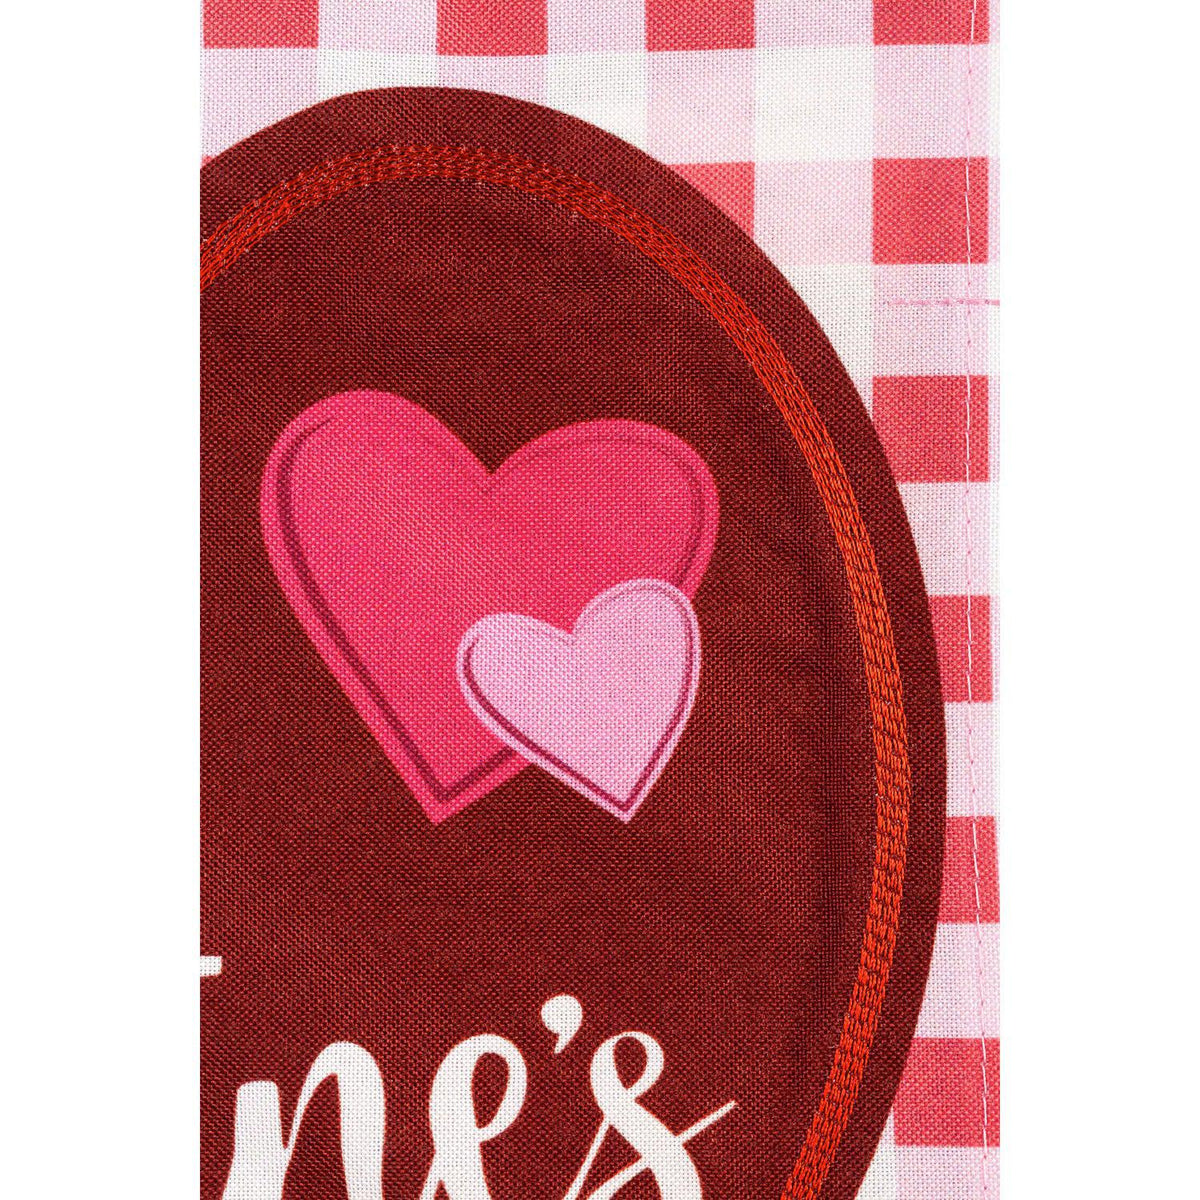 The Valentine Hearts and Checks house banner features pink and red hearts on a checked background and the words "Happy Valentine's Day". 